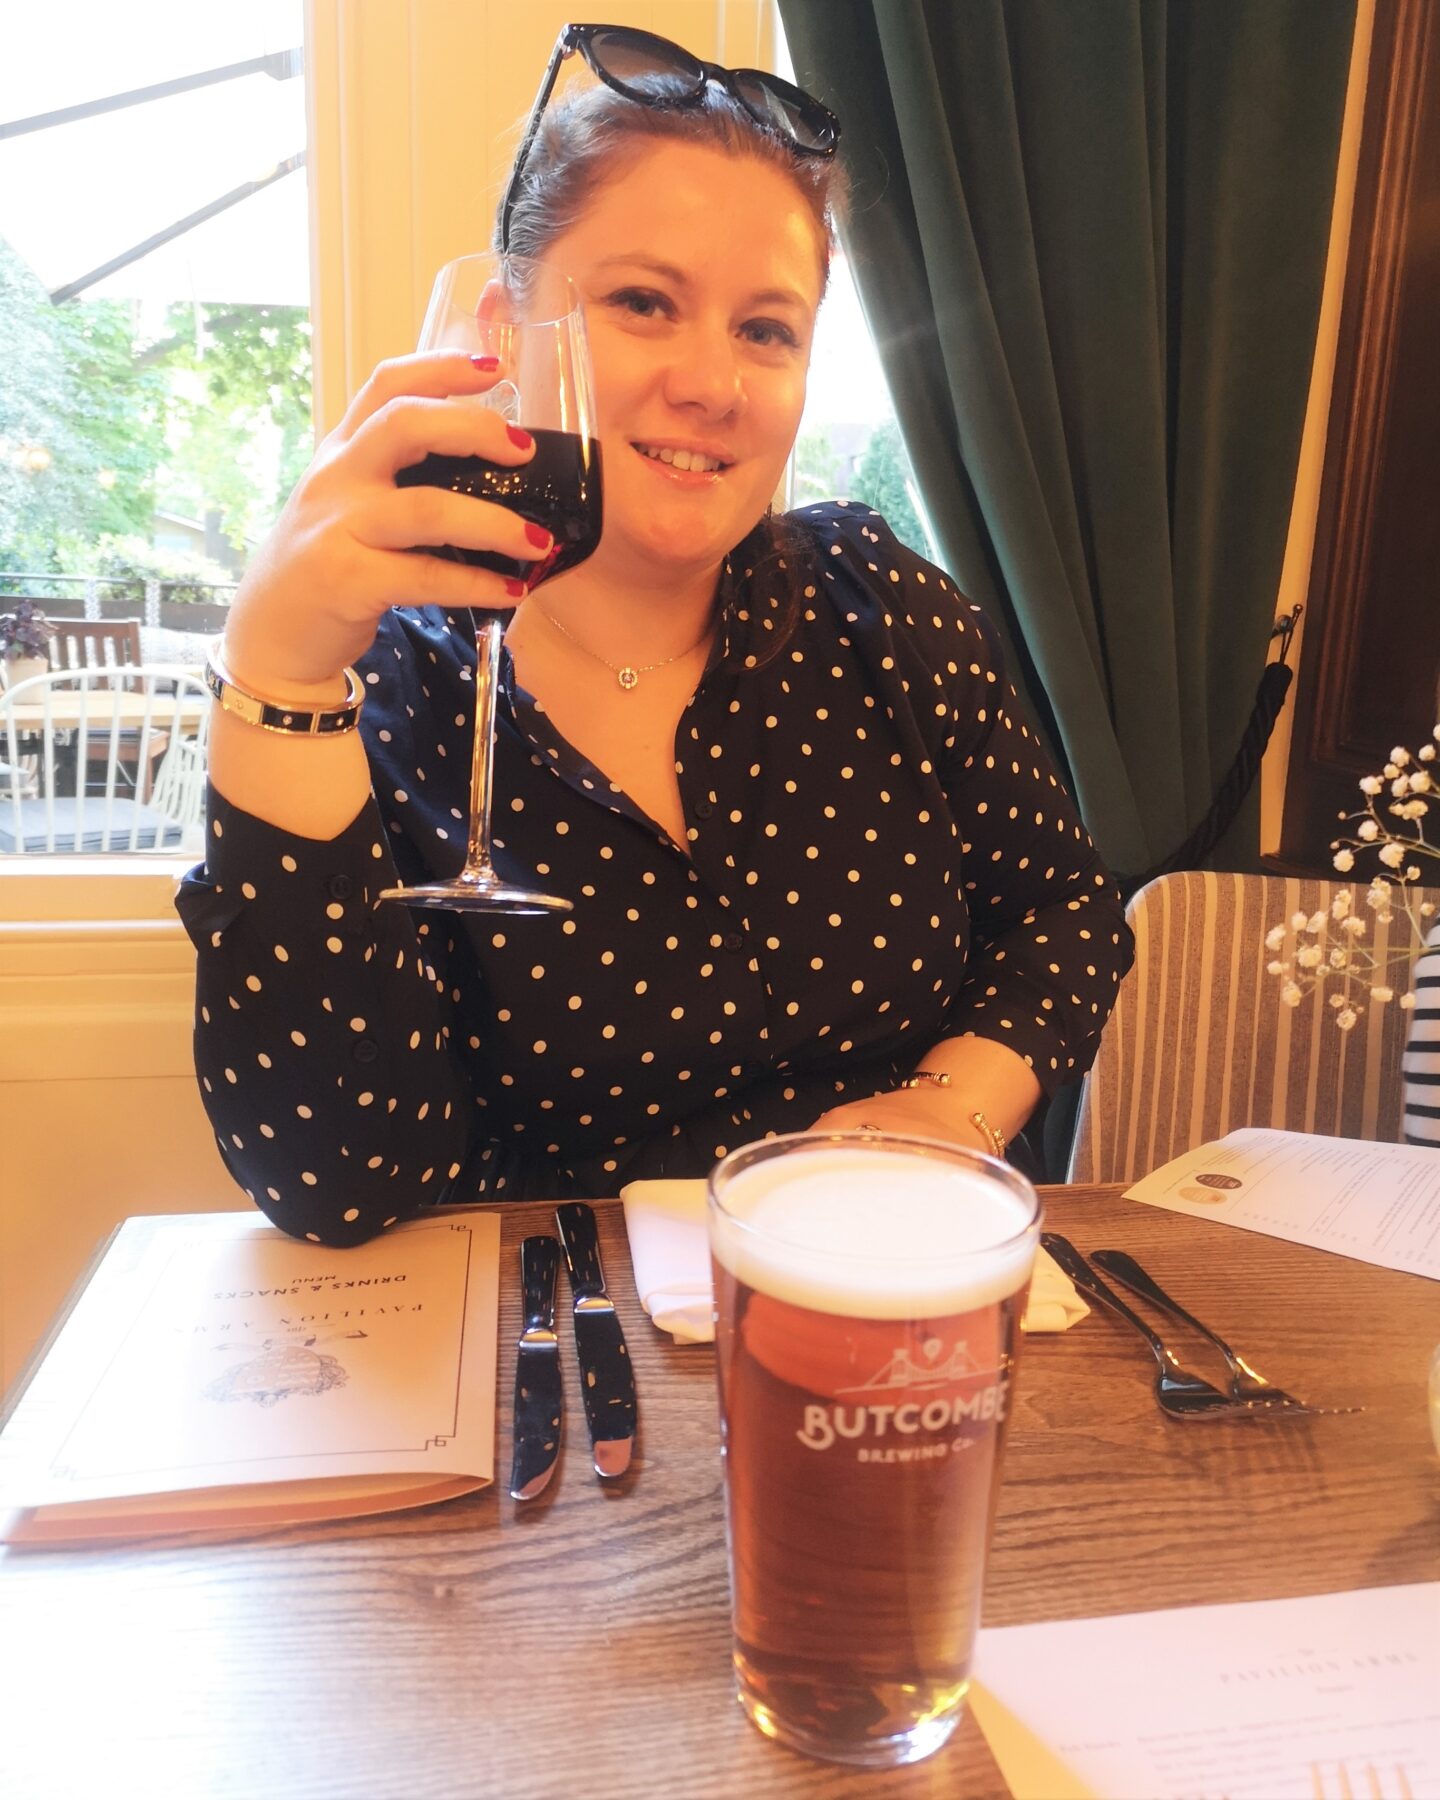 The Pavilion Arms in Bournemouth, The Pavilion Arms, Bournemouth, Dorset, Butcombe Brewing Co, Pub Hotel, Hotel Review, Family-Friendly, UK Holiday, UK Staycation, UK Hotel, Seaside Resort, The Frenchie Mummy